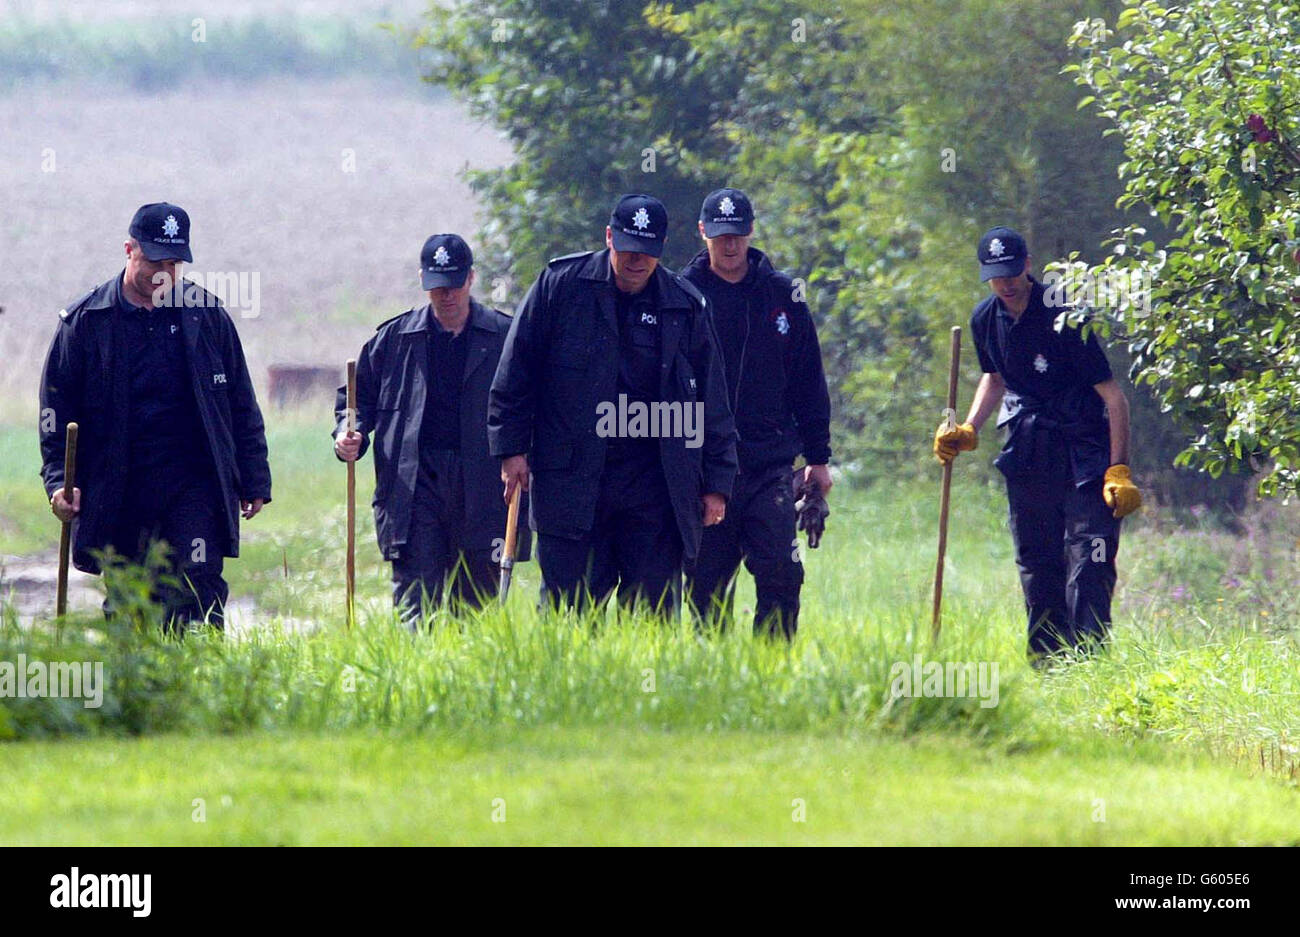 Police continue to search for evidence on missing 10-year-old girls, Holly Wells and Jessica Chapman at a farm yard in Wicken, near Soham, Cambridgeshire. The two girls went missing on Sunday August 4 2002. *... Police have been focusing on sightings of the pair around the town of Soham, where the girls disappeared. Officers are continuing house-to-house inquiries and have begun searching outlying areas of the town, including fields, ditches, drains and waterways. Torrential rain has lashed the town in the past 48 hours and officers have admitted they fear vital evidence could be washed away. Stock Photo